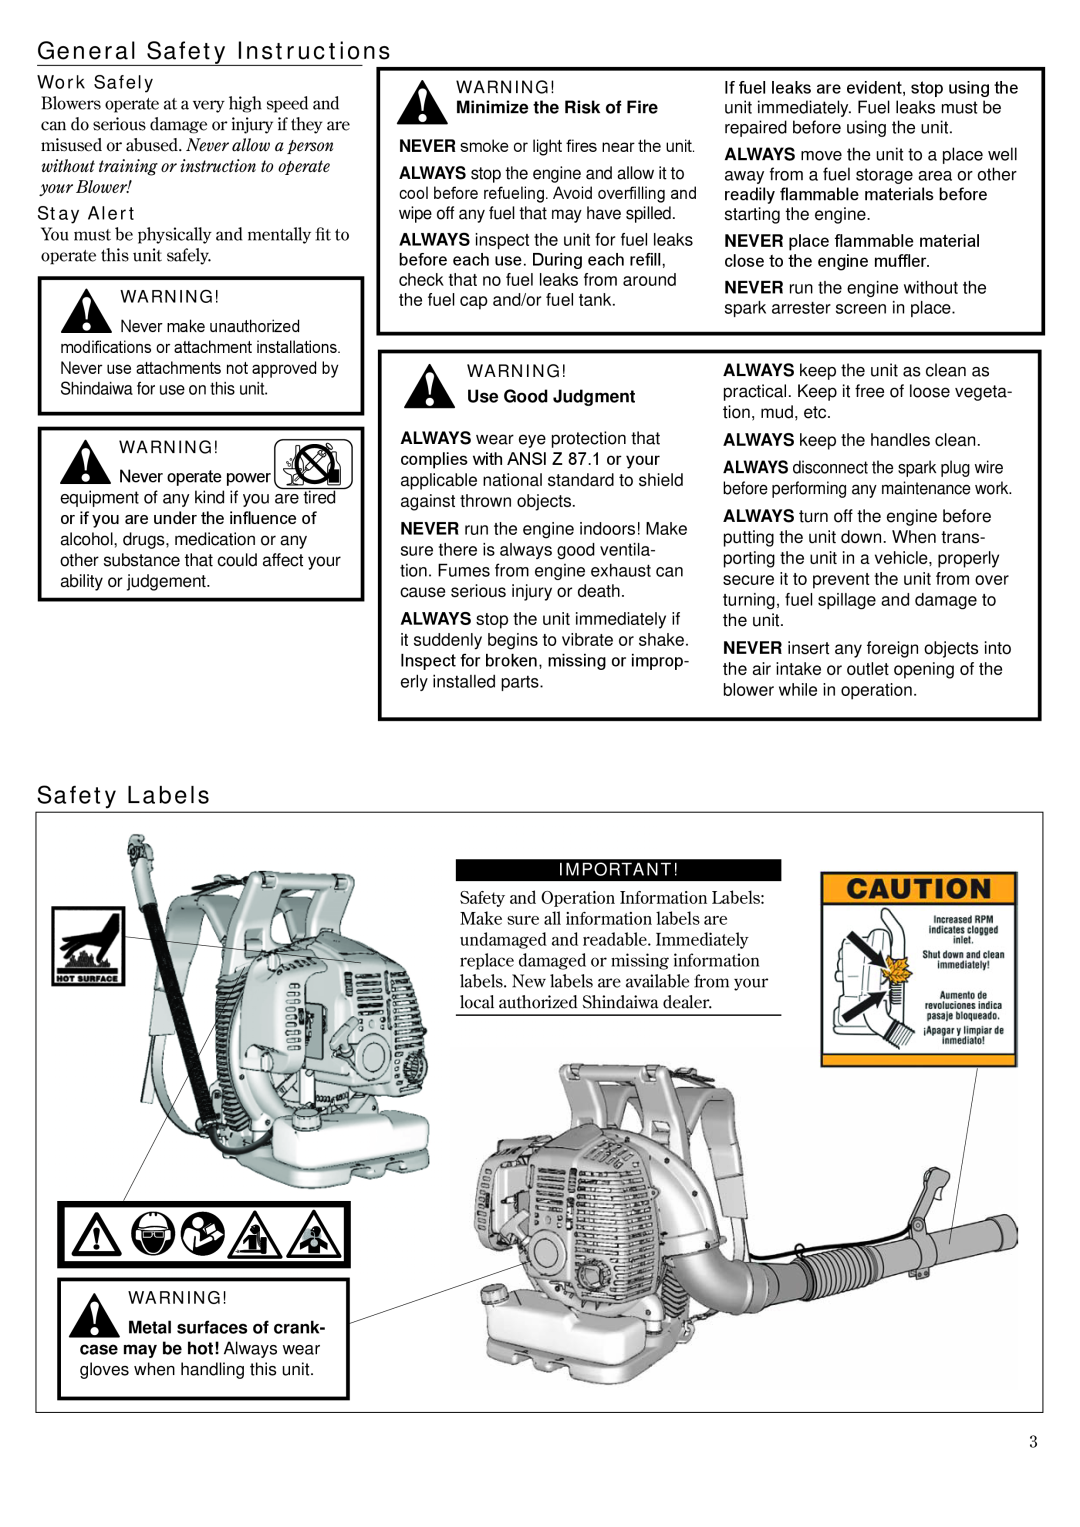 Shindaiwa EB802RT manual General Safety Instructions, Safety Labels, Work Safely, Stay Alert, Minimize the Risk of Fire 